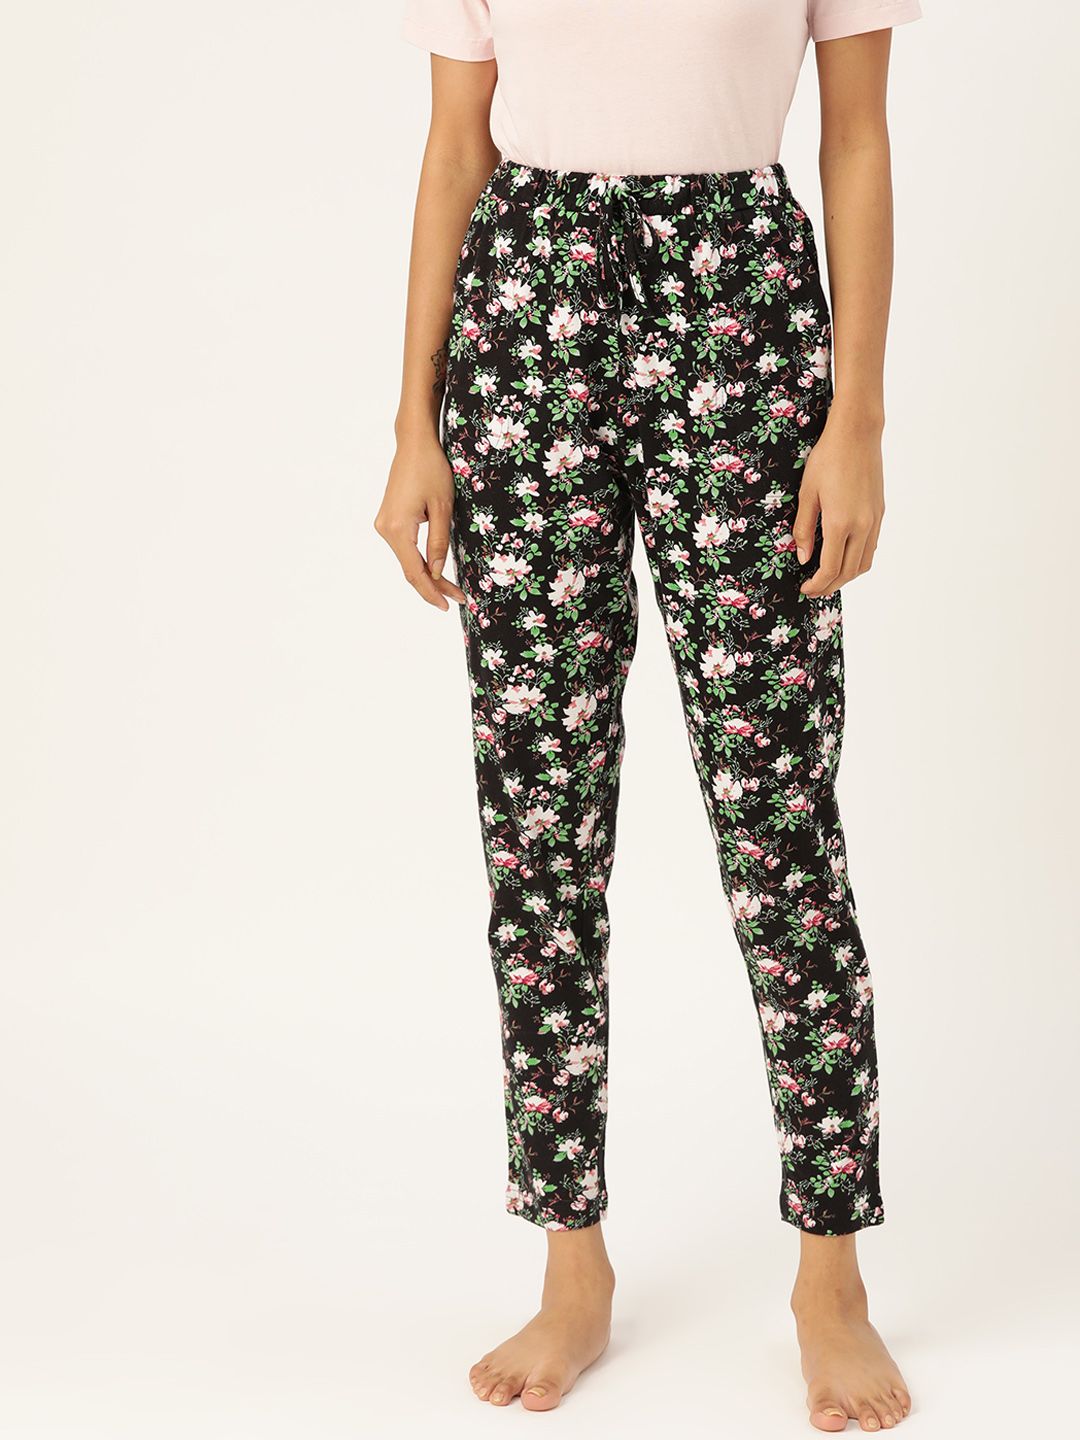 ETC Women Black Pure Cotton Floral Print Lounge Pants Price in India